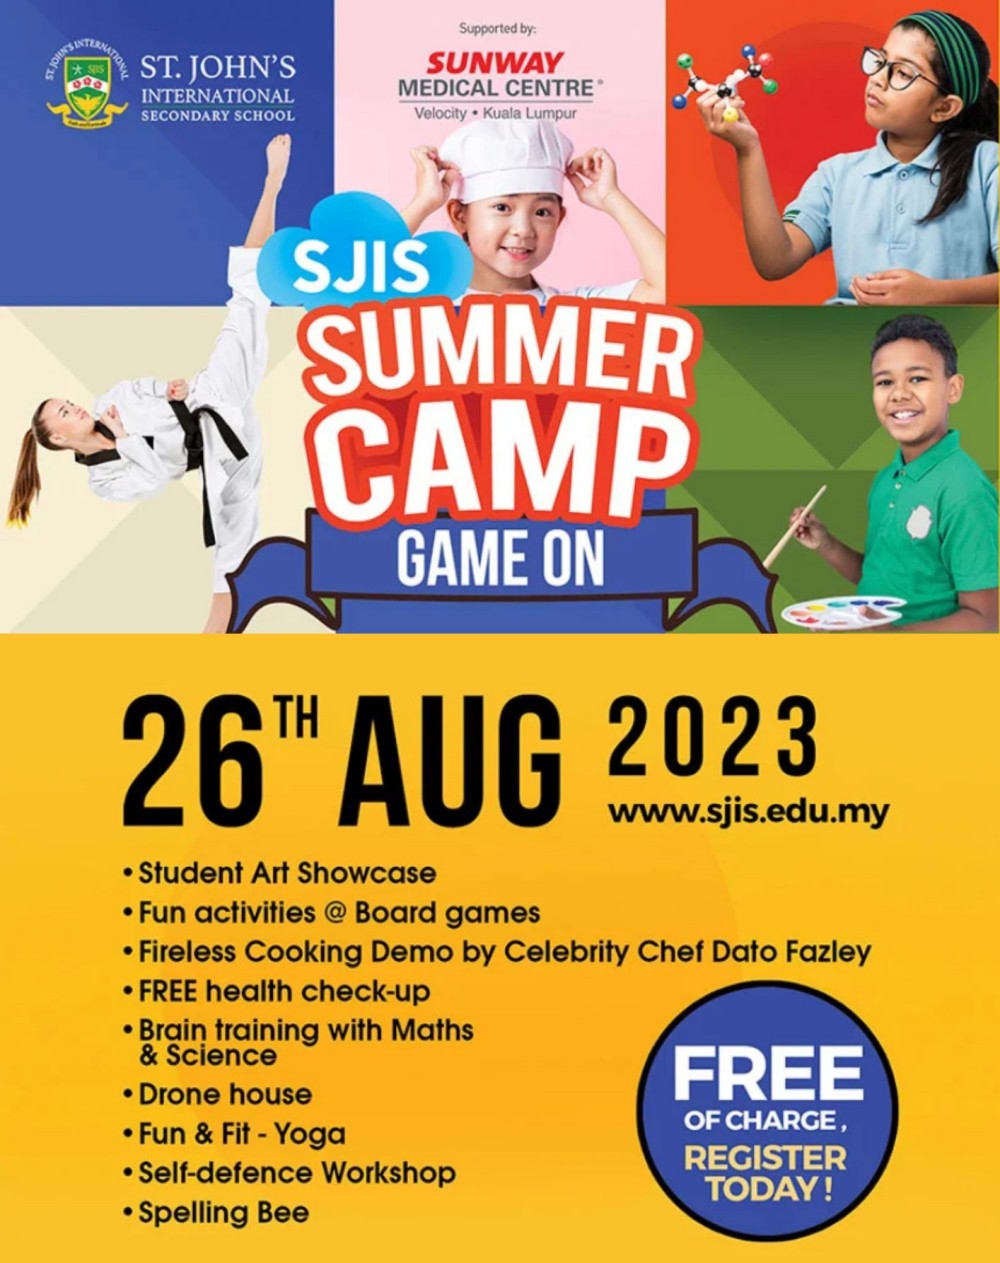 St. John International School's Summer Camp: An Unmissable Experience for Secondary School Students